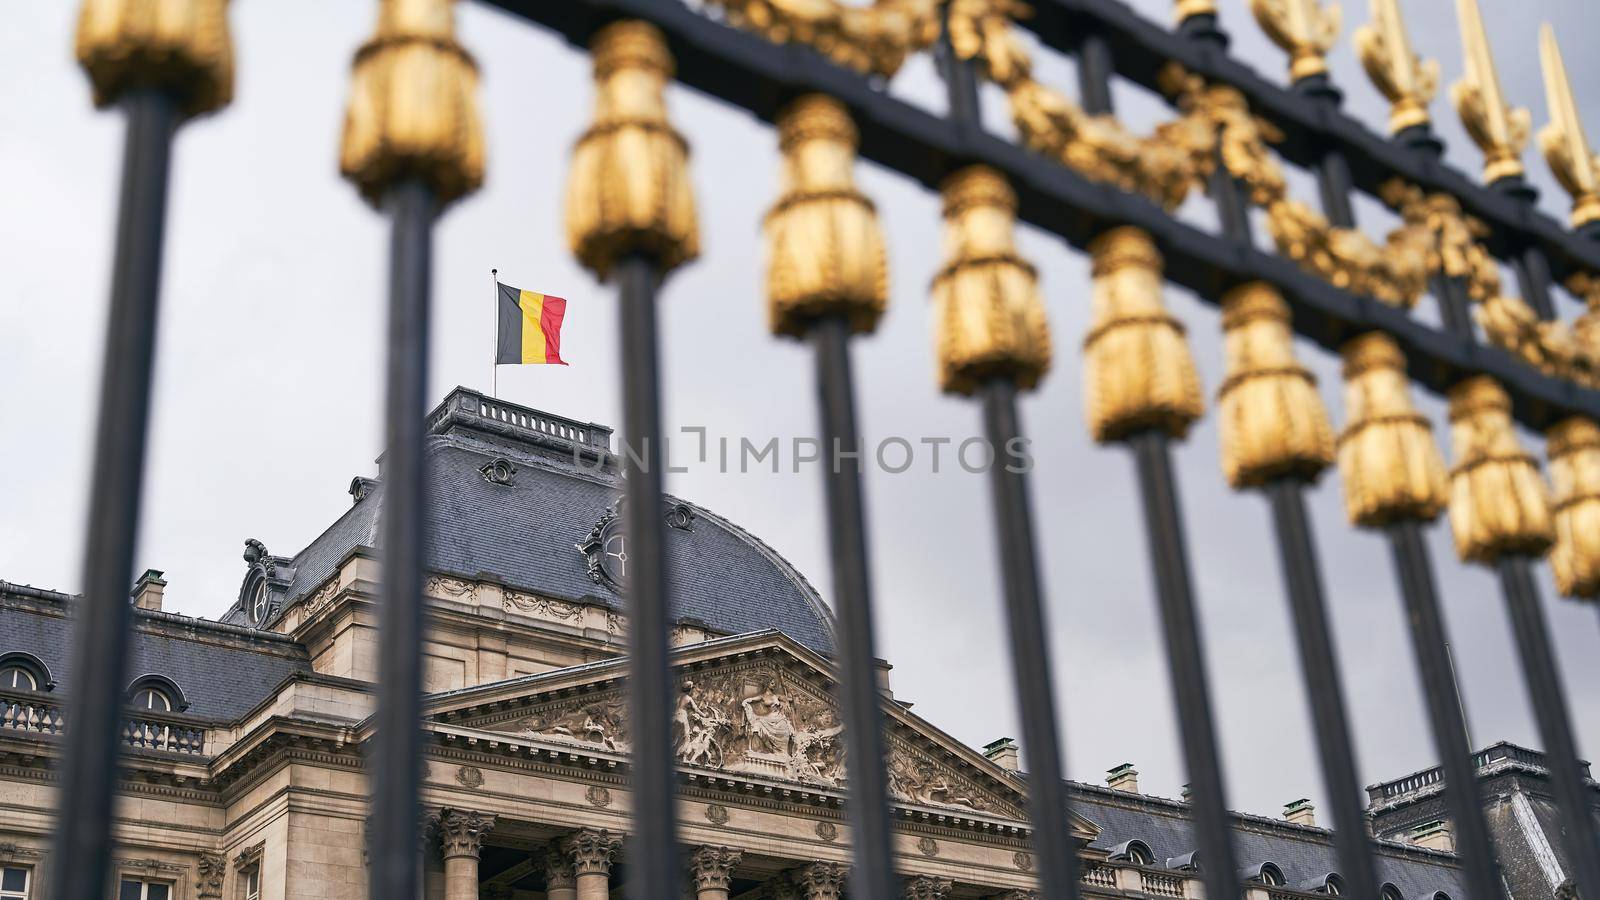 The Royal Palace in Brussels, Belgium. View through the metal fence with golden details